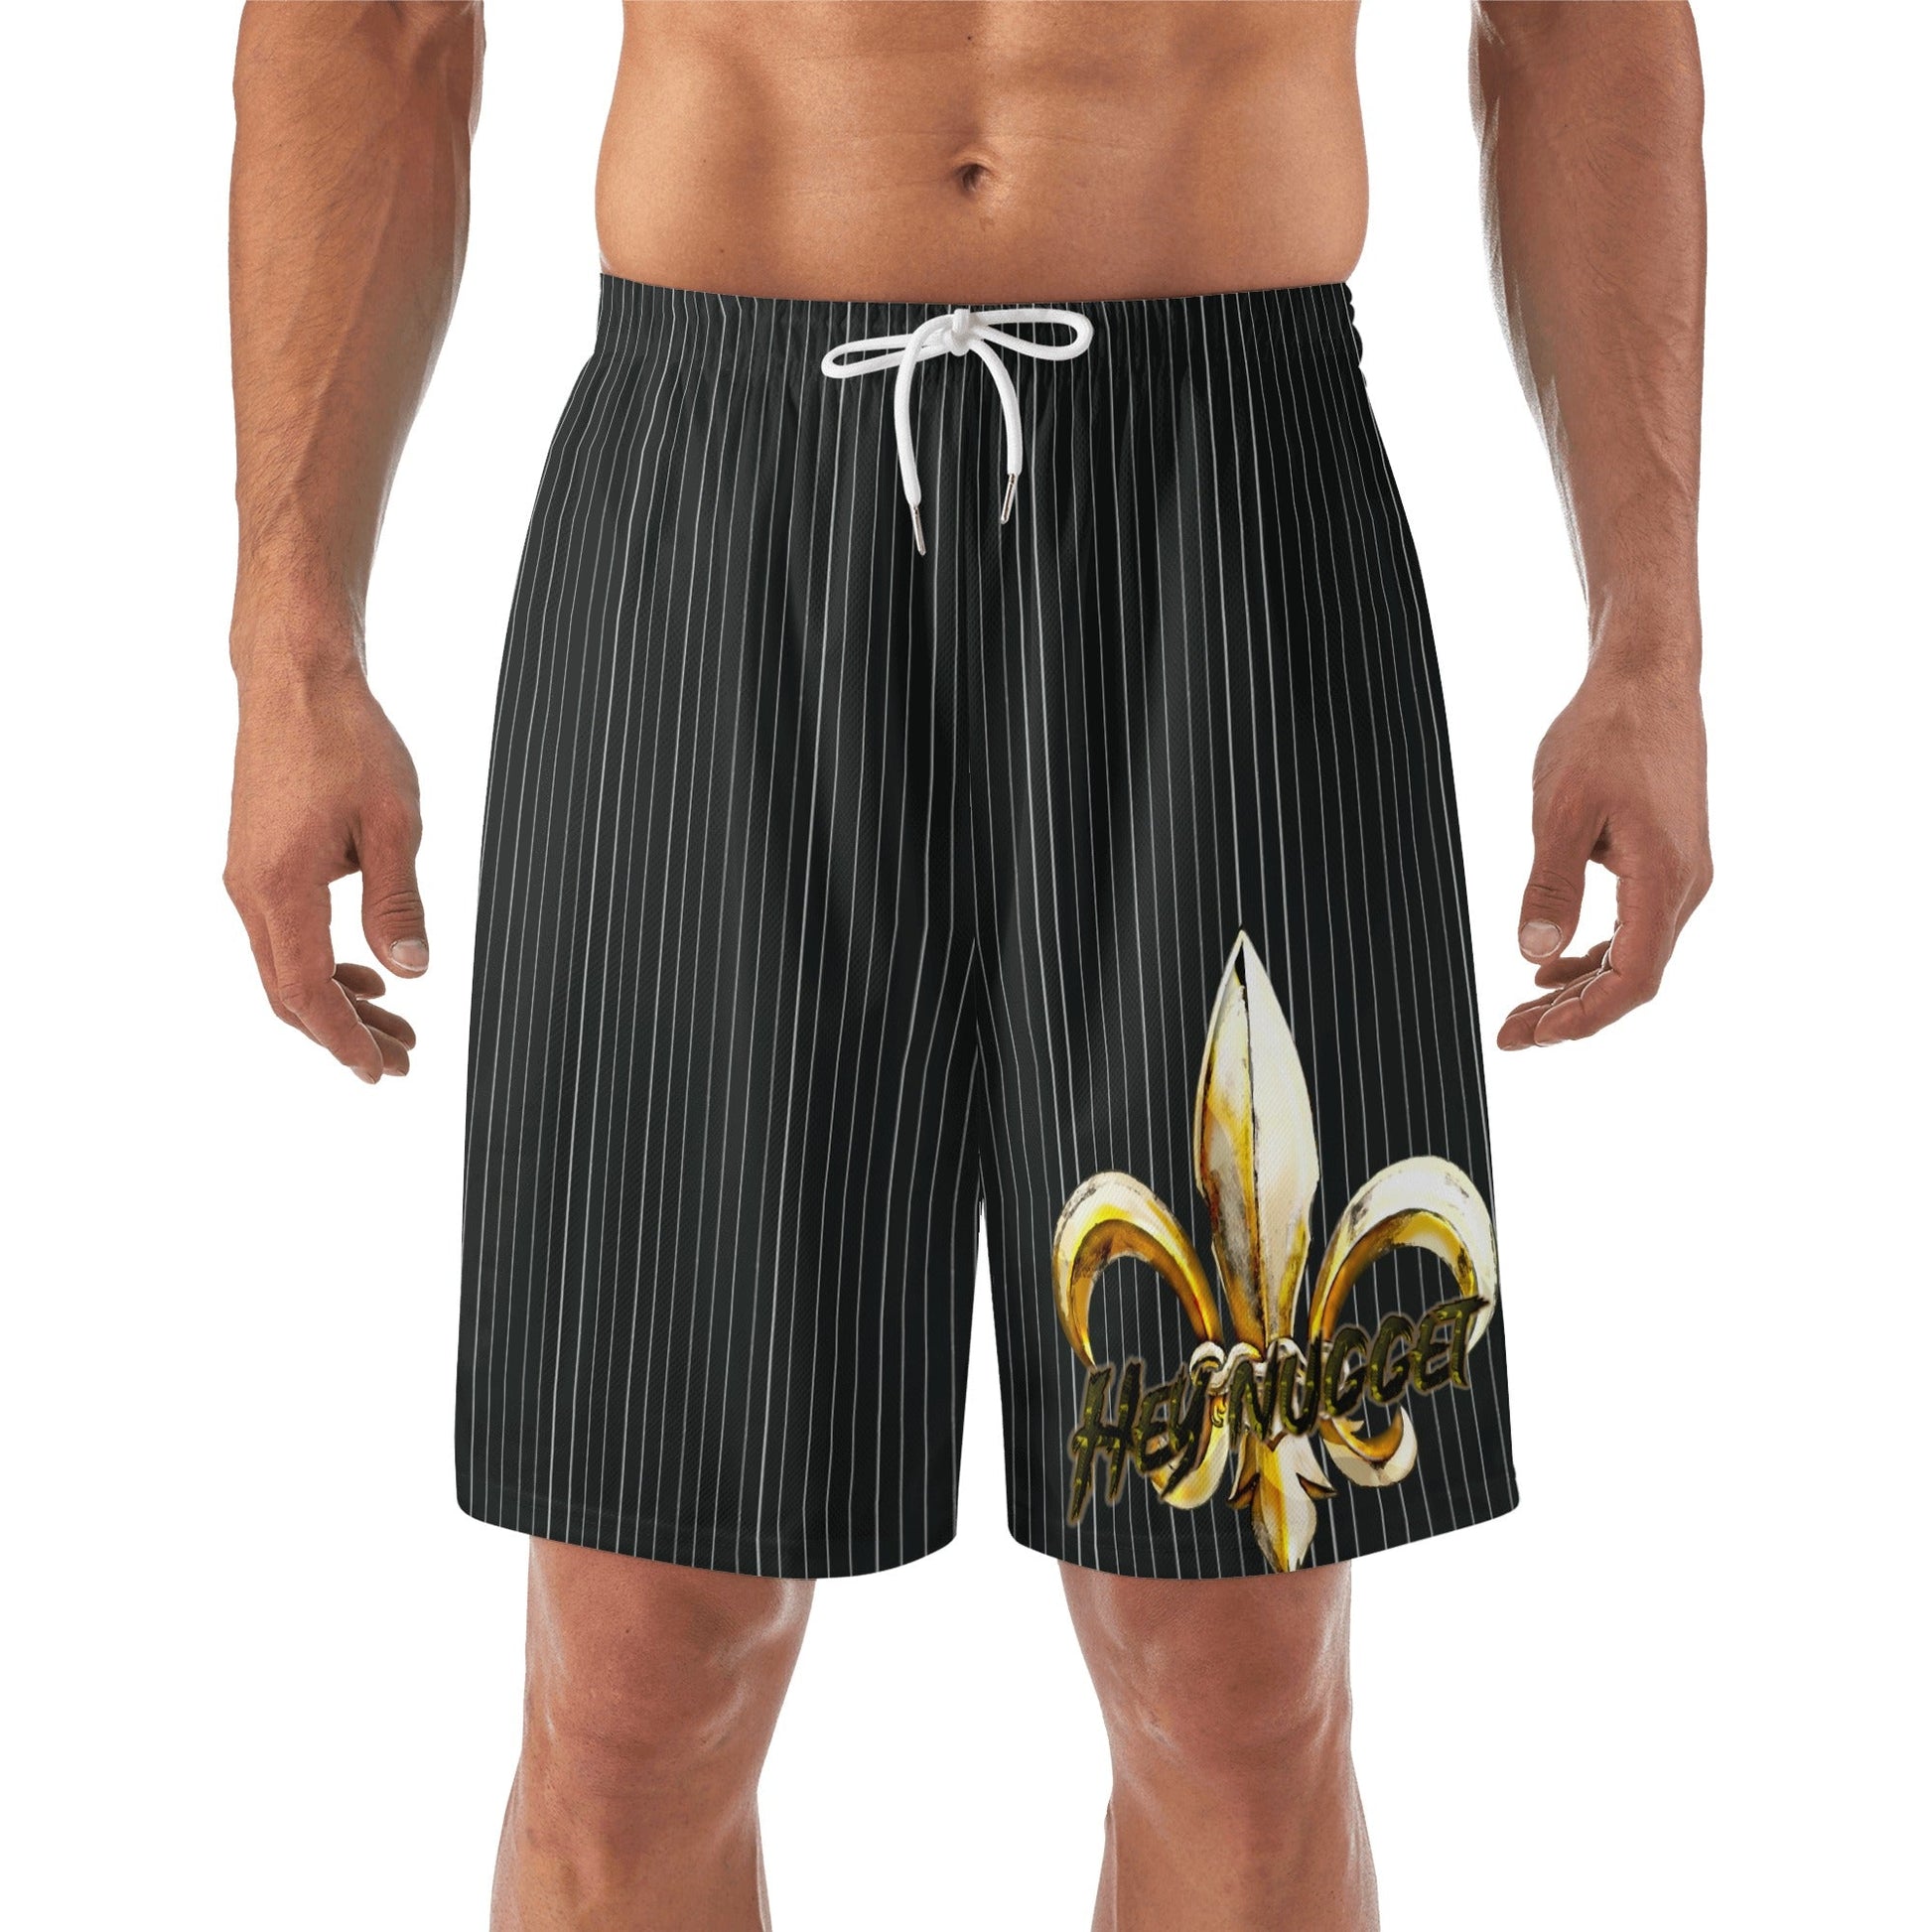 Stand out  with the  Men's Lightweight Beach Shorts  available at Hey Nugget. Grab yours today!